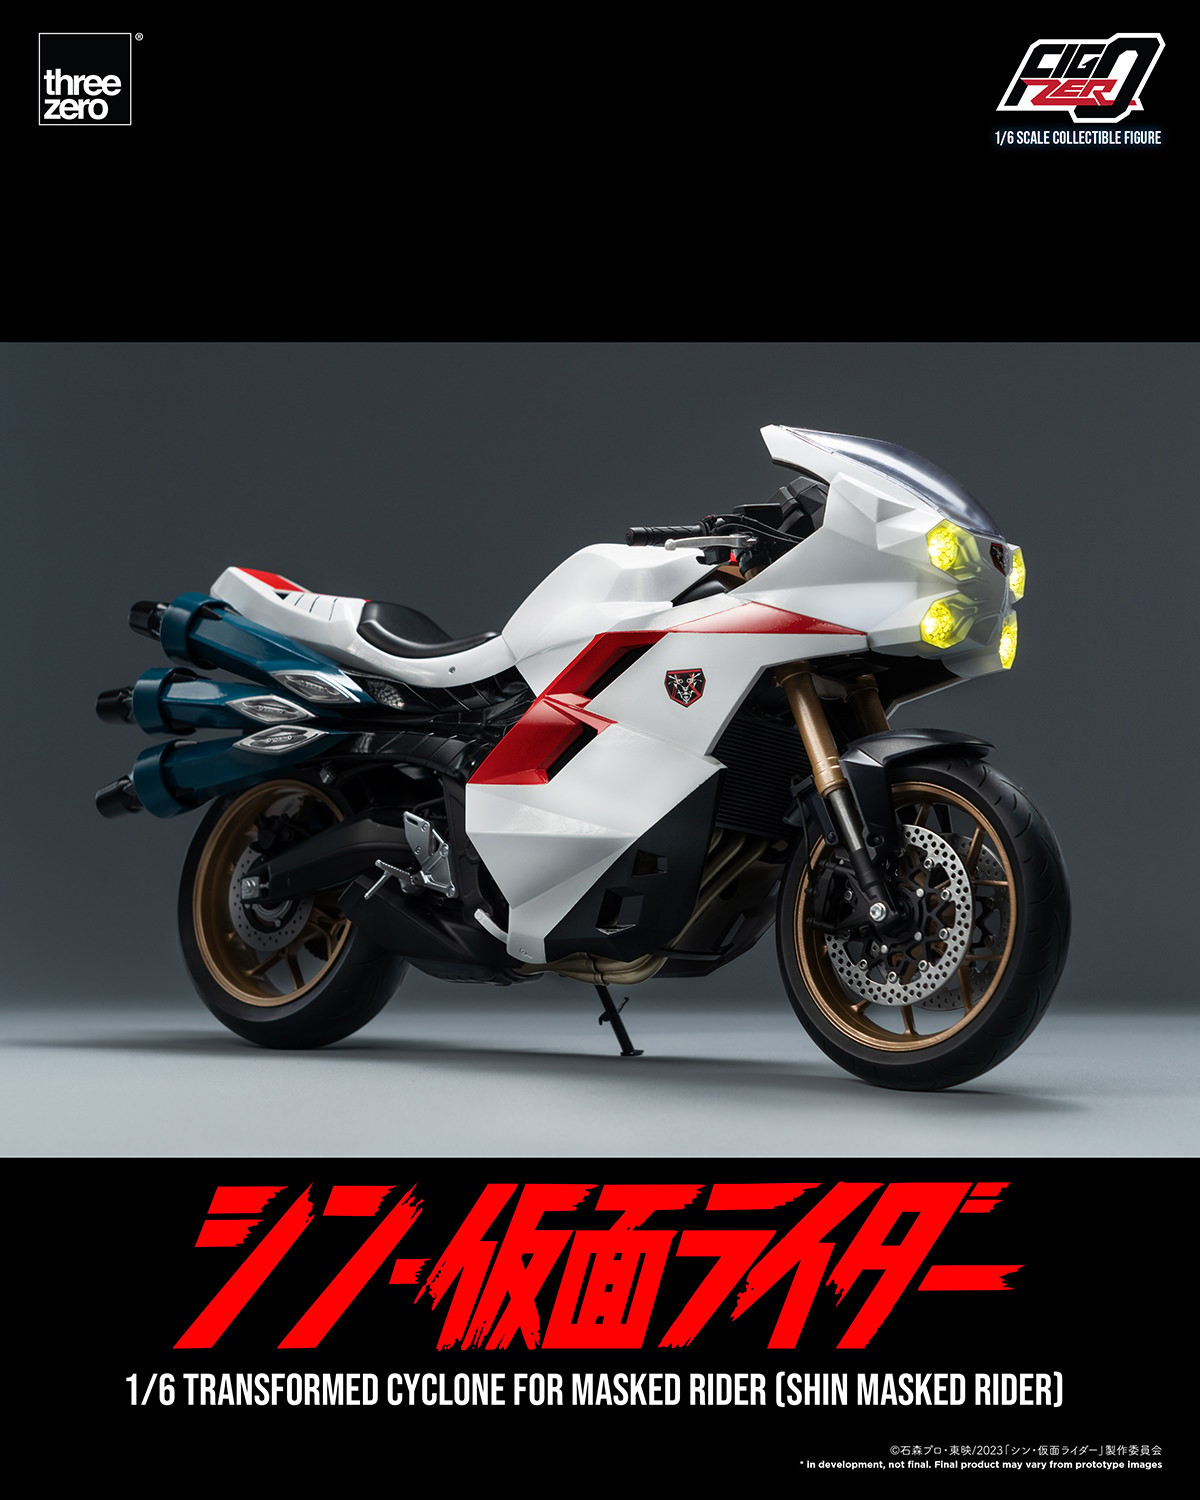 Transformed Cyclone for Masked Rider (Shin Masked Rider) (Prototype Shown) View 11